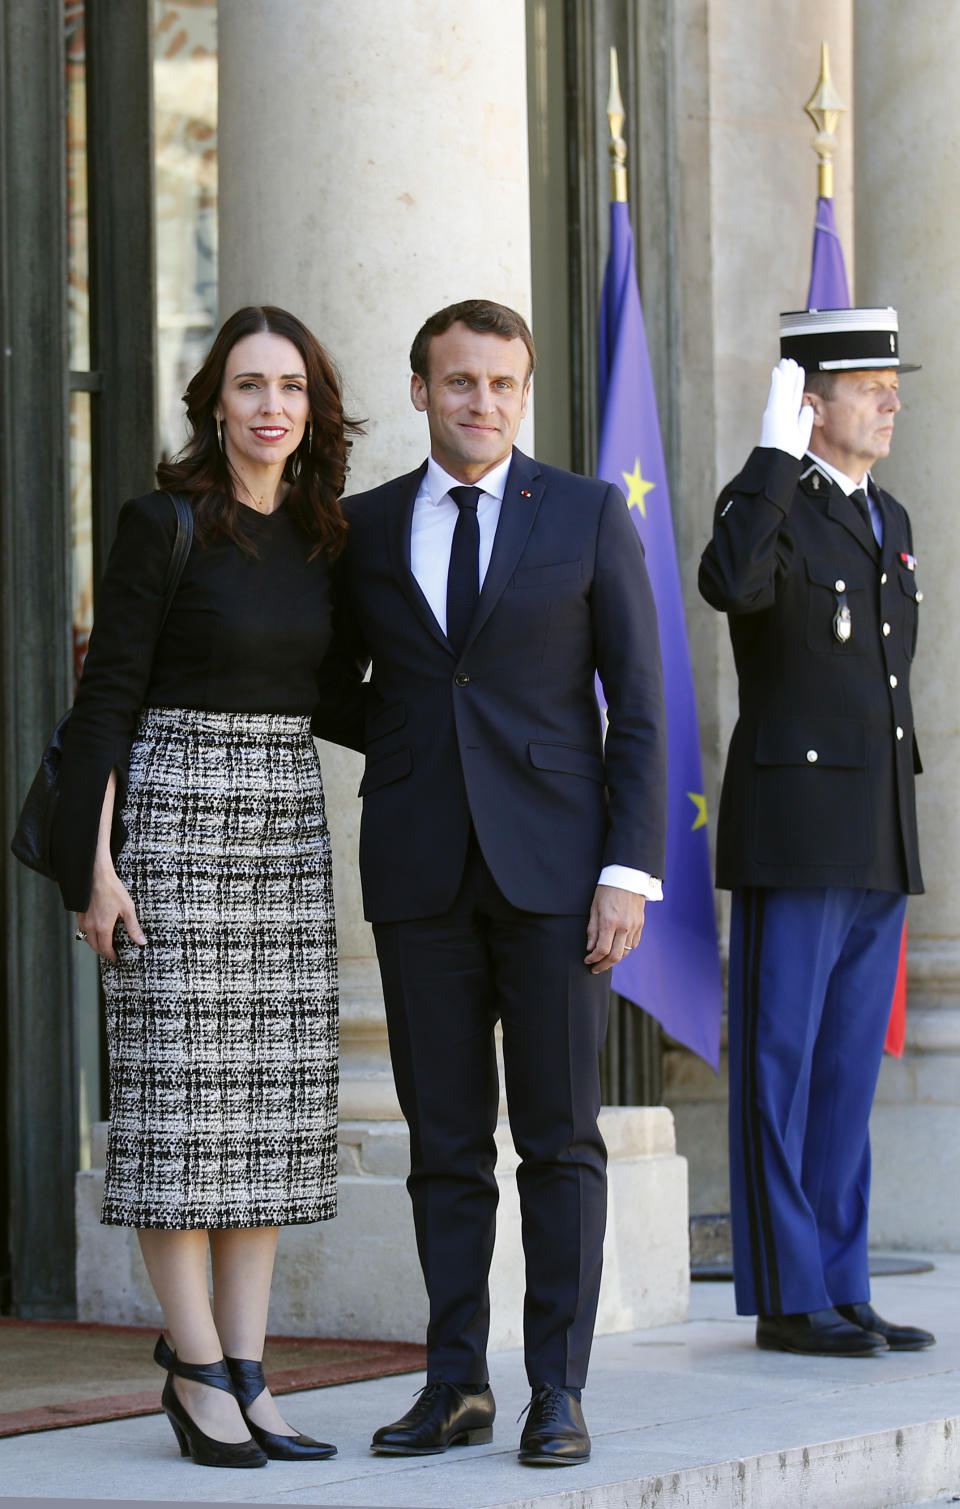 New Zealand Prime Minister Jacinda Ardern, left, is greeted by French President Emmanuel Macron, center, as she arrives at the Elysee Palace, in Paris, Wednesday, May 15, 2019. World leaders and tech bosses meet Wednesday in Paris to discuss ways to prevent social media from spreading deadly ideas. (AP Photo/Francois Mori)